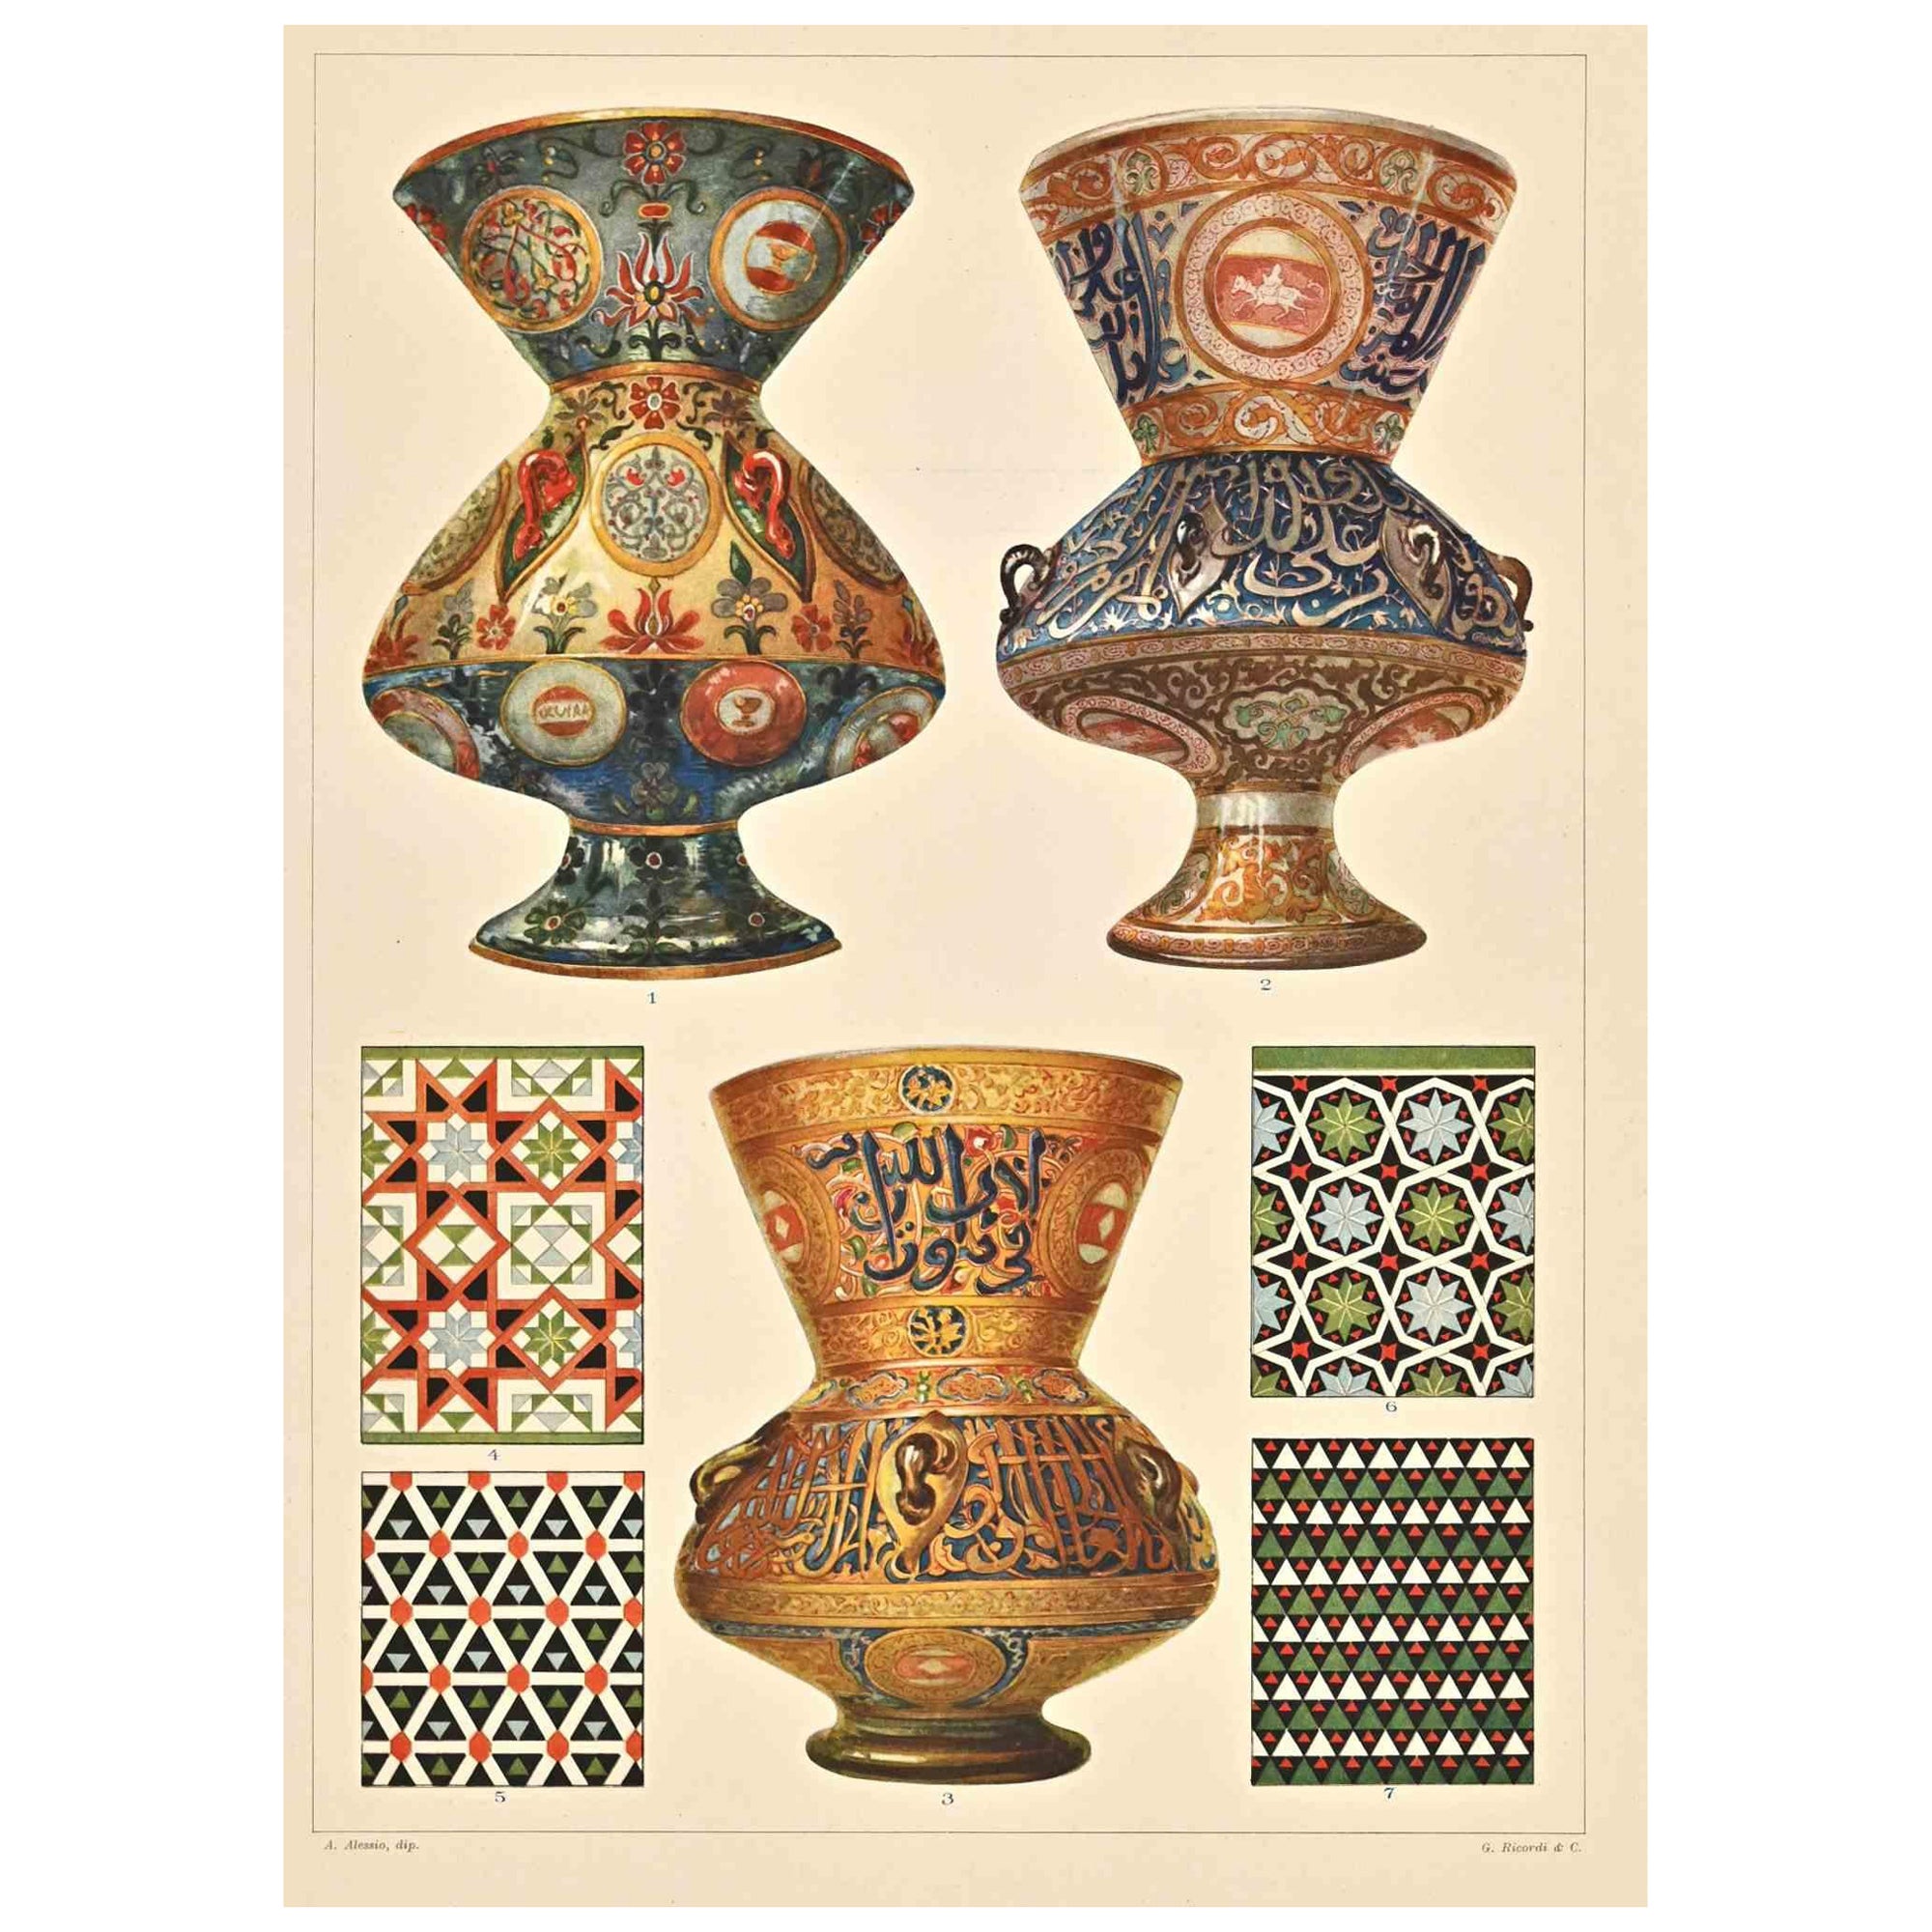 Decorative Motifs - Arab Styles is a print on ivory-colored paper realized by Andrea Alessio in the early 20th Century. Signed on the plate on the lower.

Vintage Chromolithograph.

Very good conditions.

The artwork represents Decorative motifs